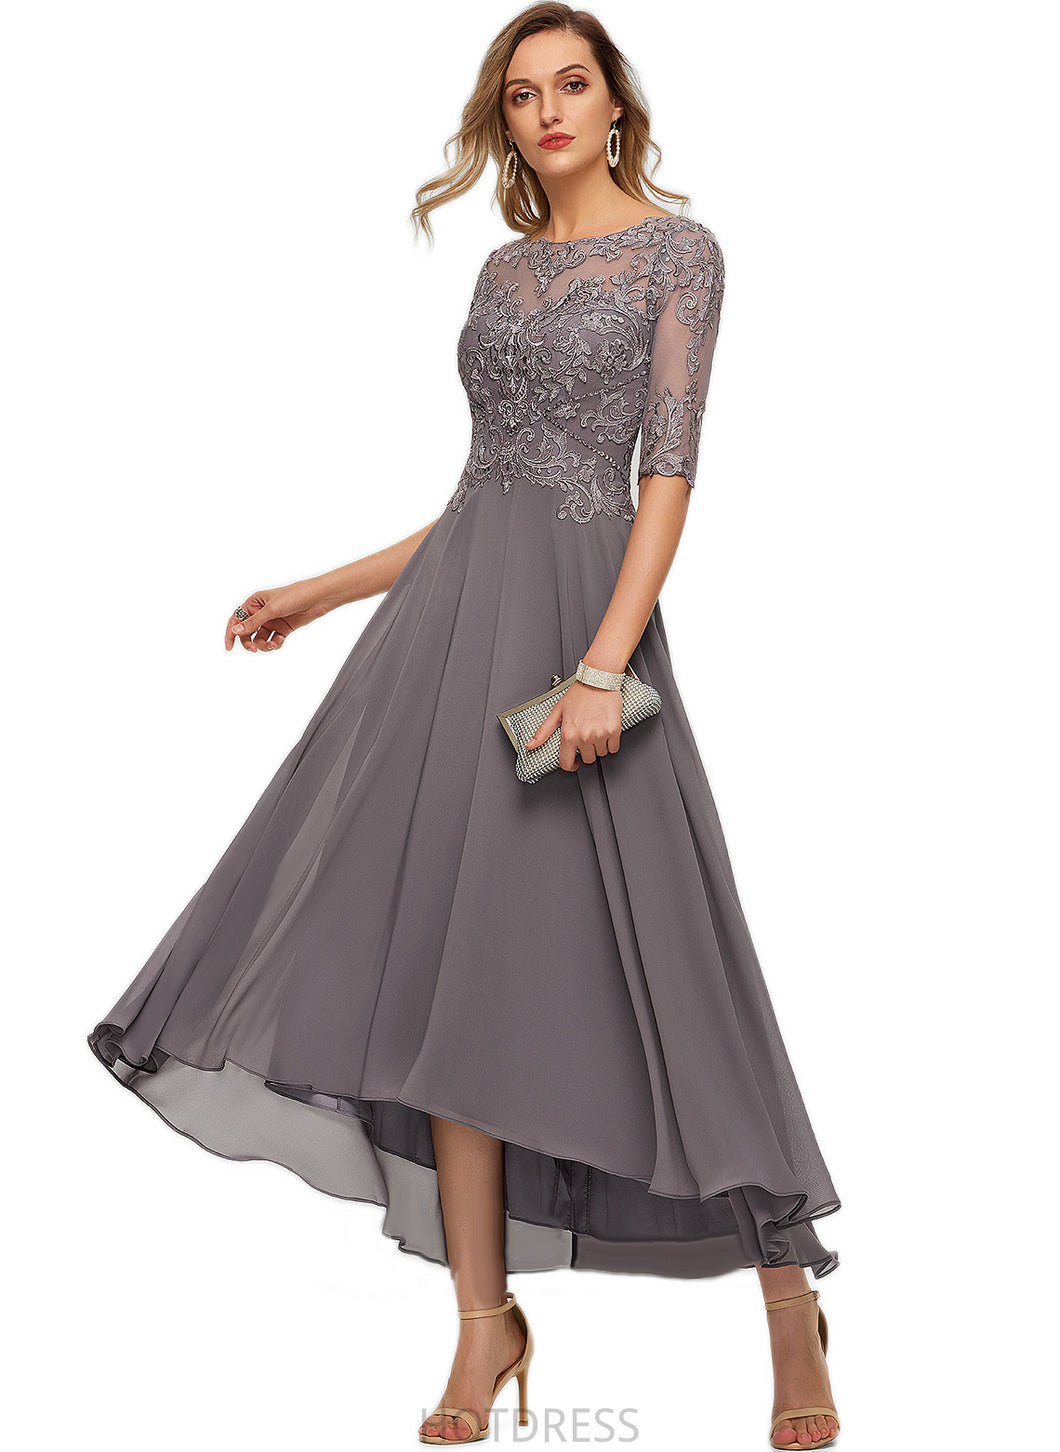 Crystal A-line Boat Neck Illusion Asymmetrical Chiffon Lace Evening Dress With Beading Sequins HDOP0020793